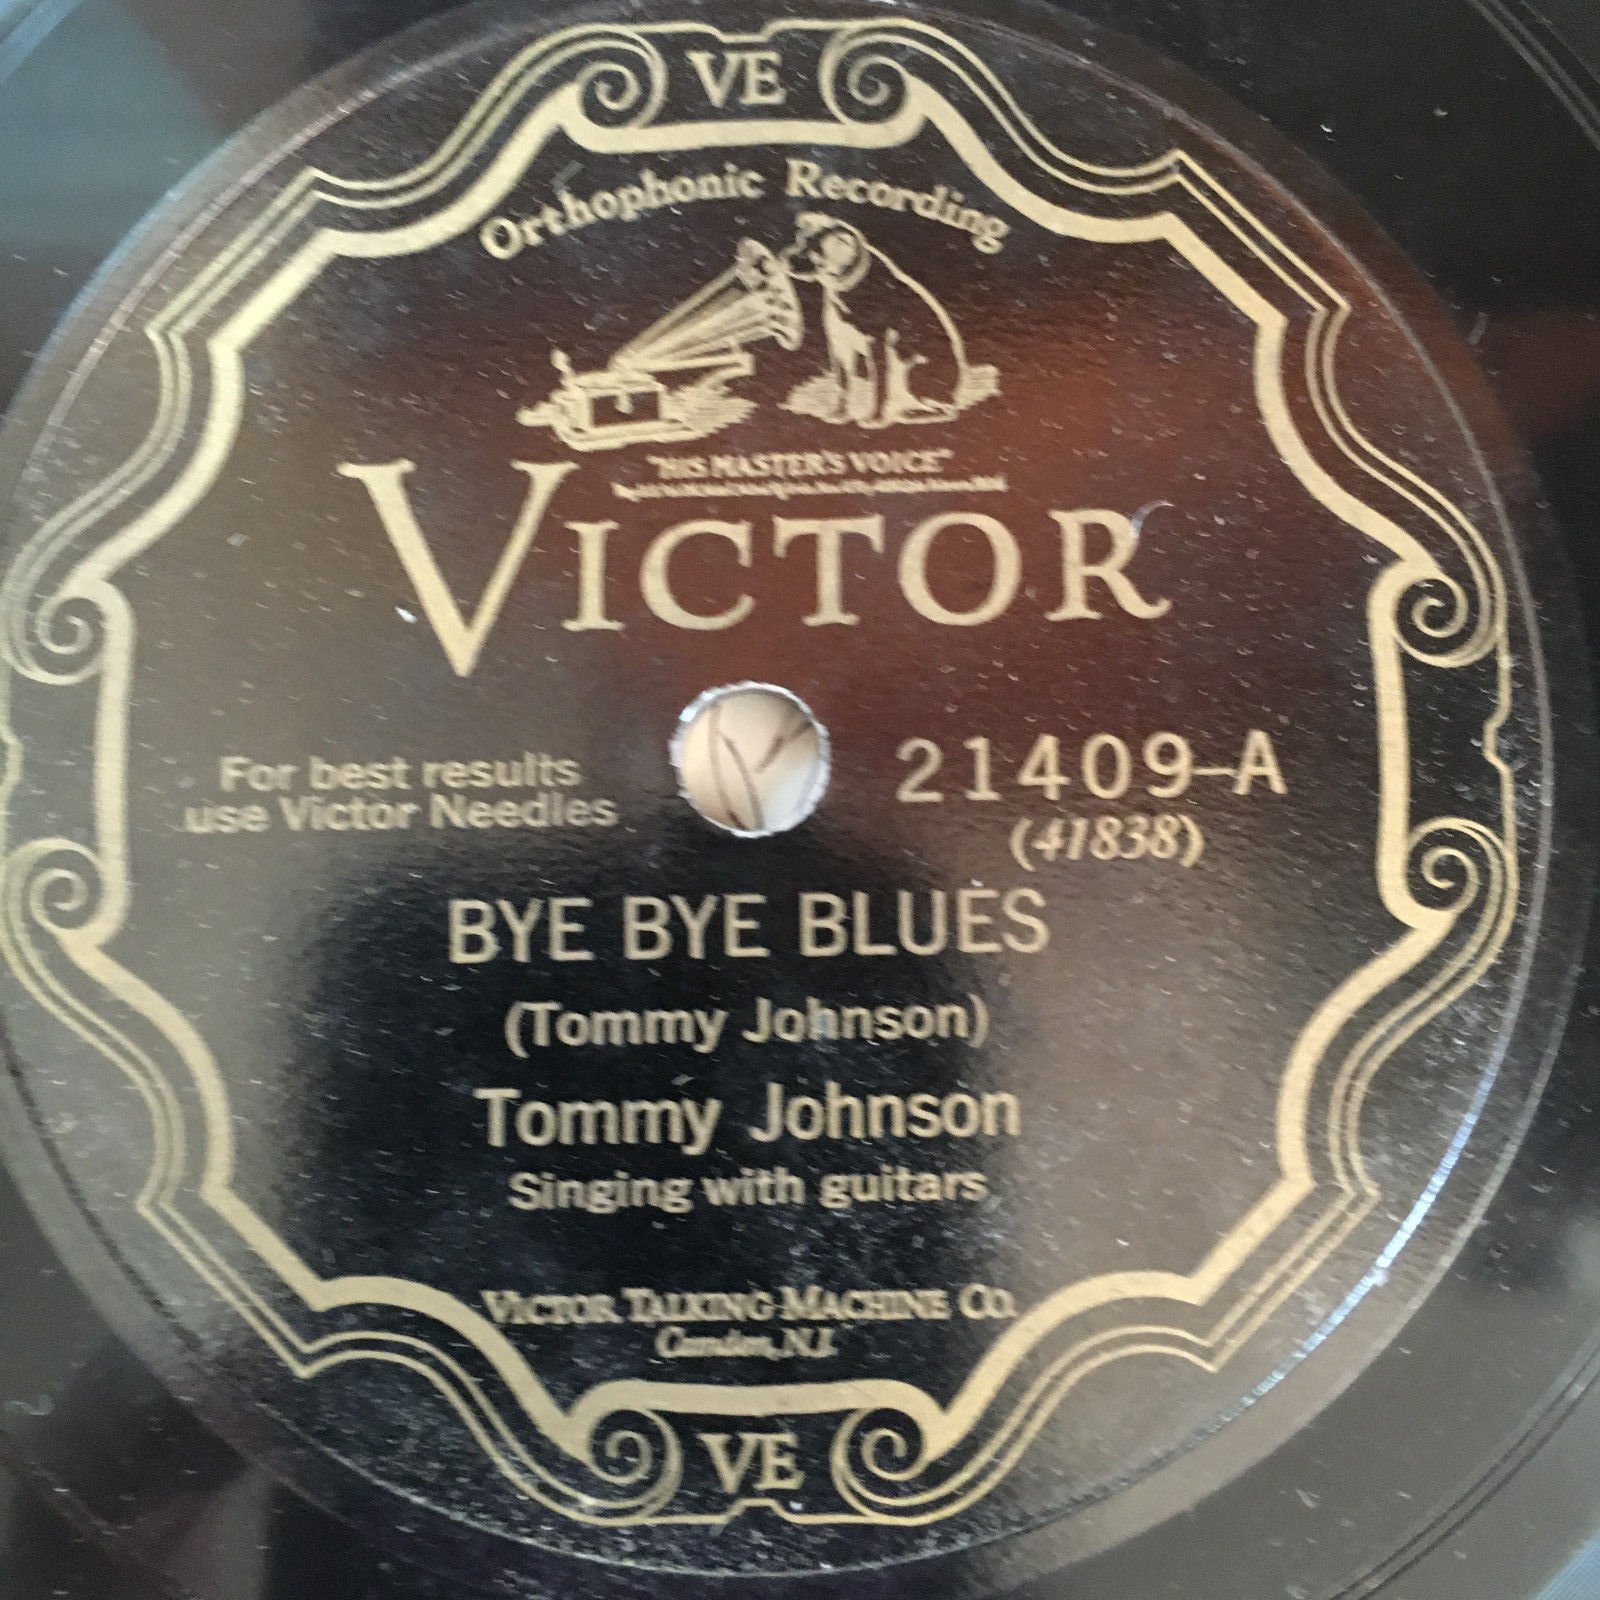 Victor 21409 TOMMY JOHNSON Maggie Campbell E+  1928  78 rpm